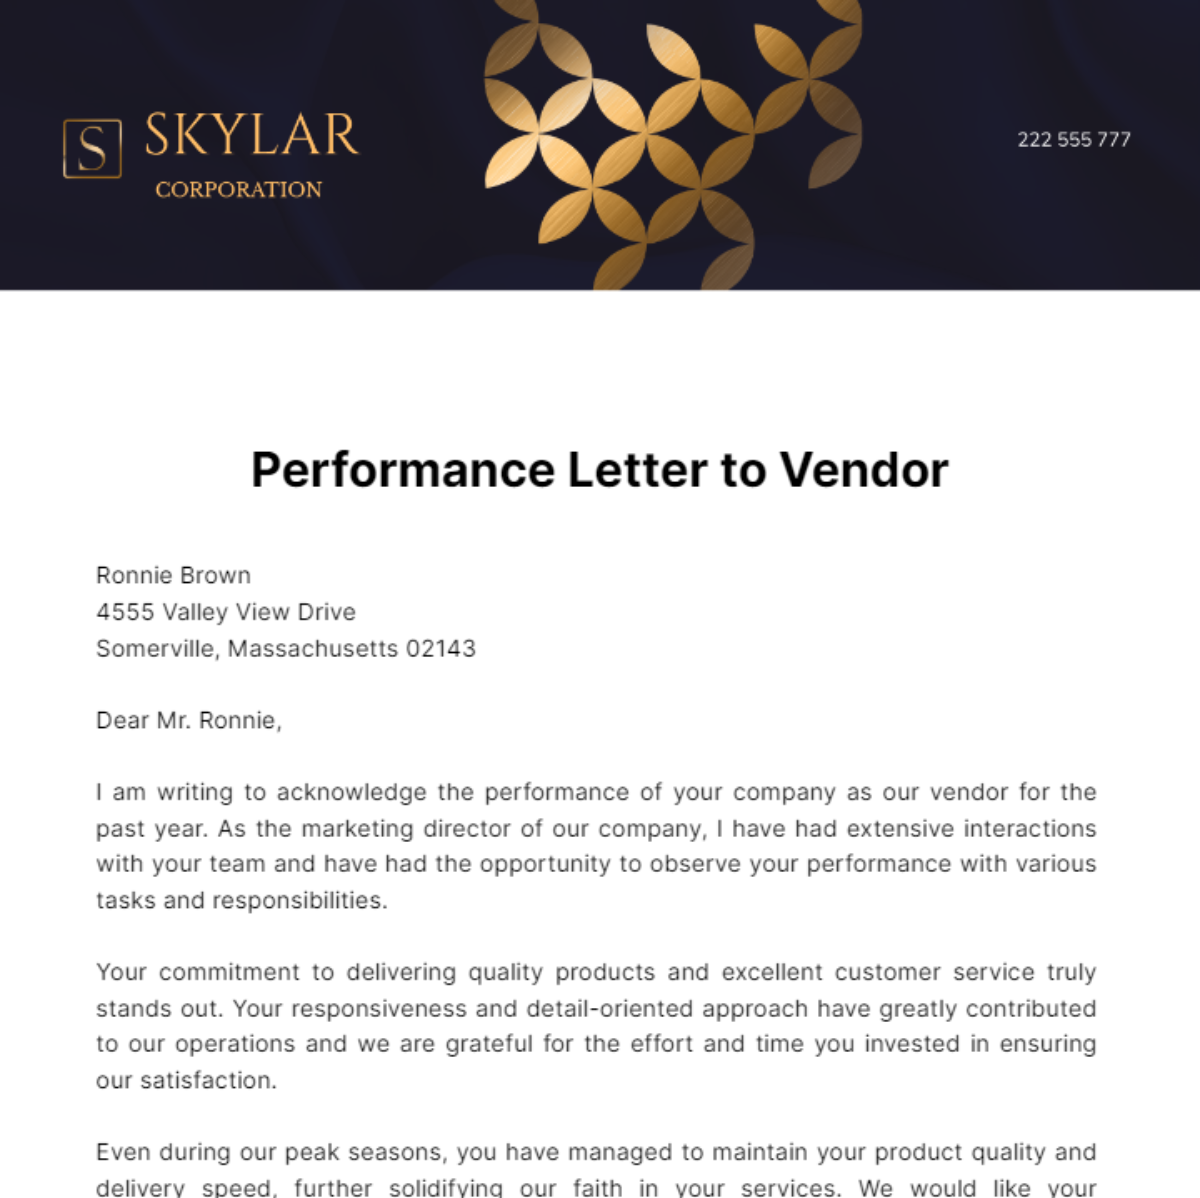 Performance Letter to Vendor Template